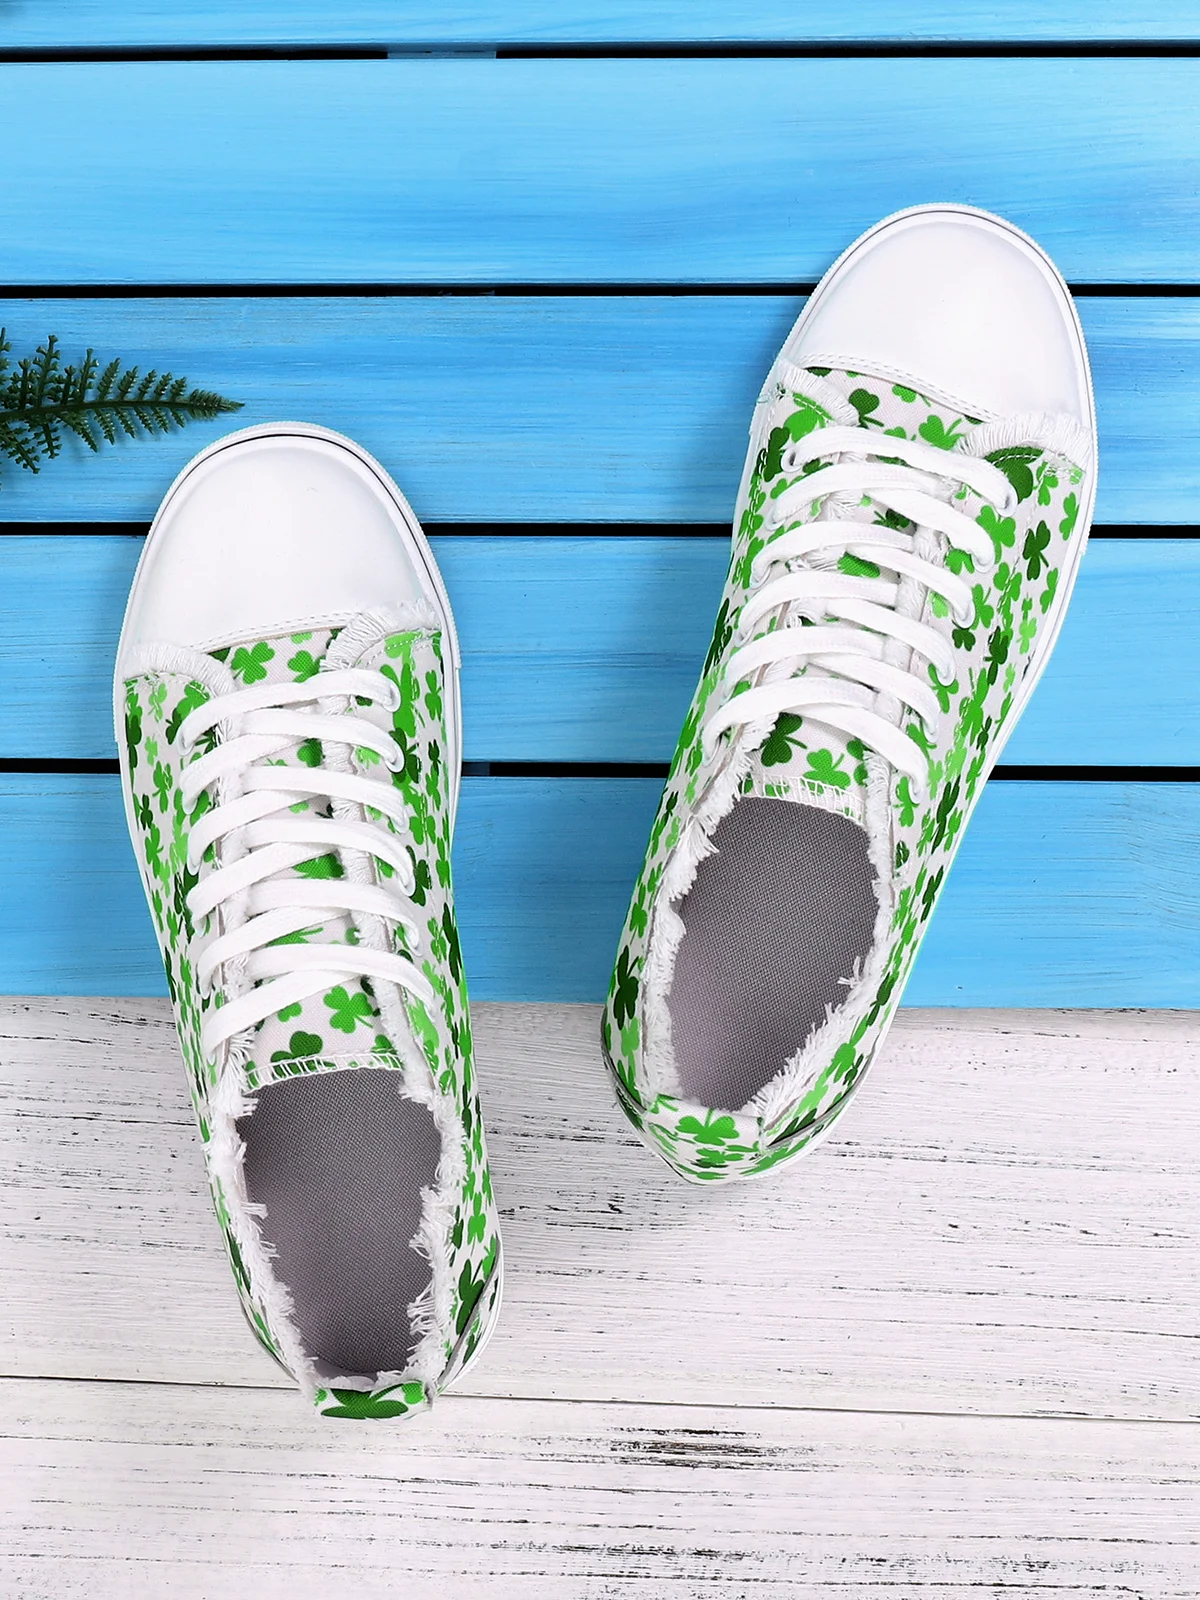 Women's Casual Shamrock Printing Lace-Up Canvas Shoes